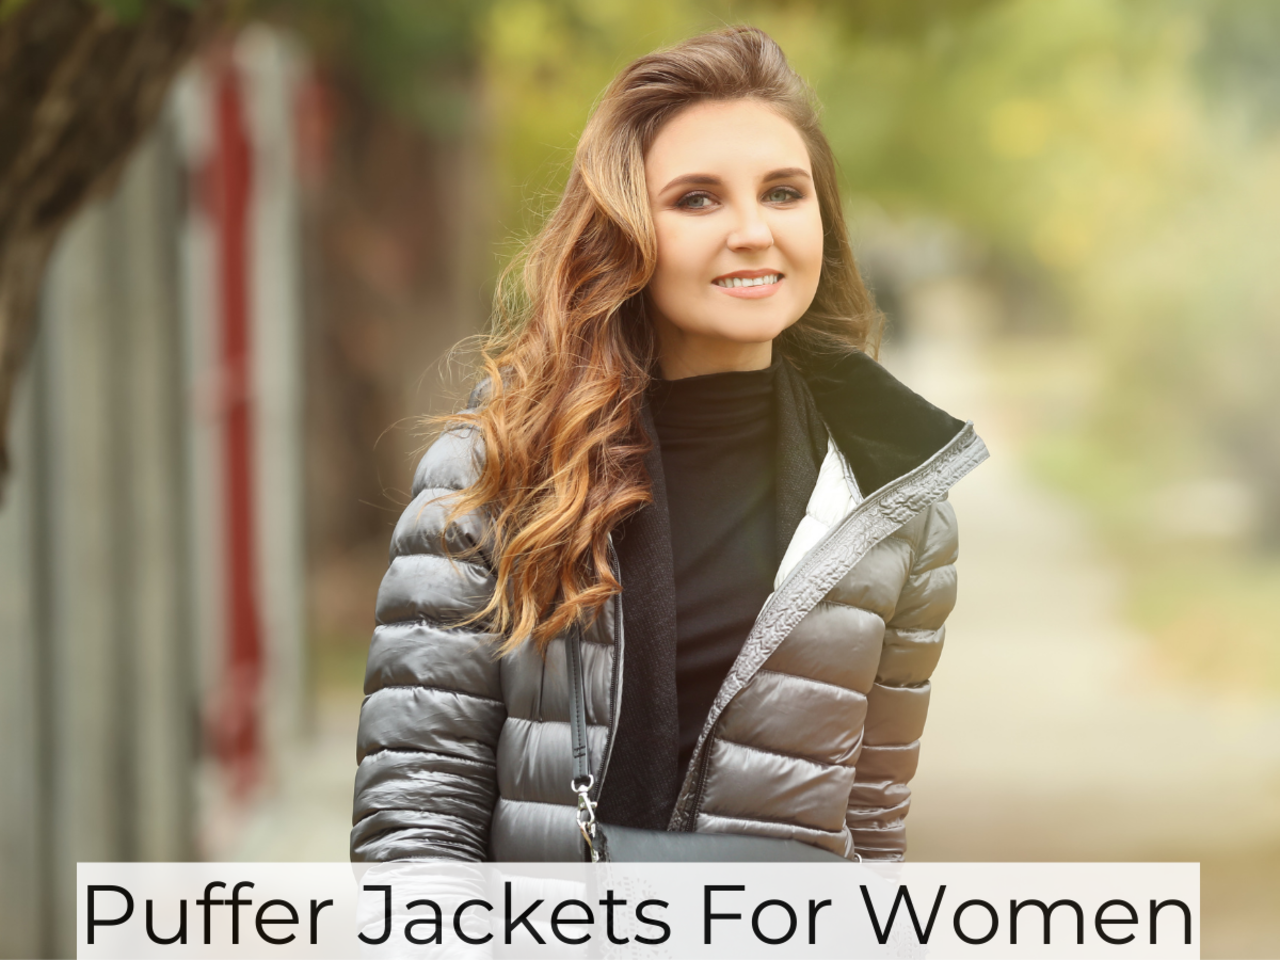 Women s Warm Quilted Puffer Jacket with Hooded Collar and Zipper Closure -  Stylish Winter Outerwear Coat for Cold Weather